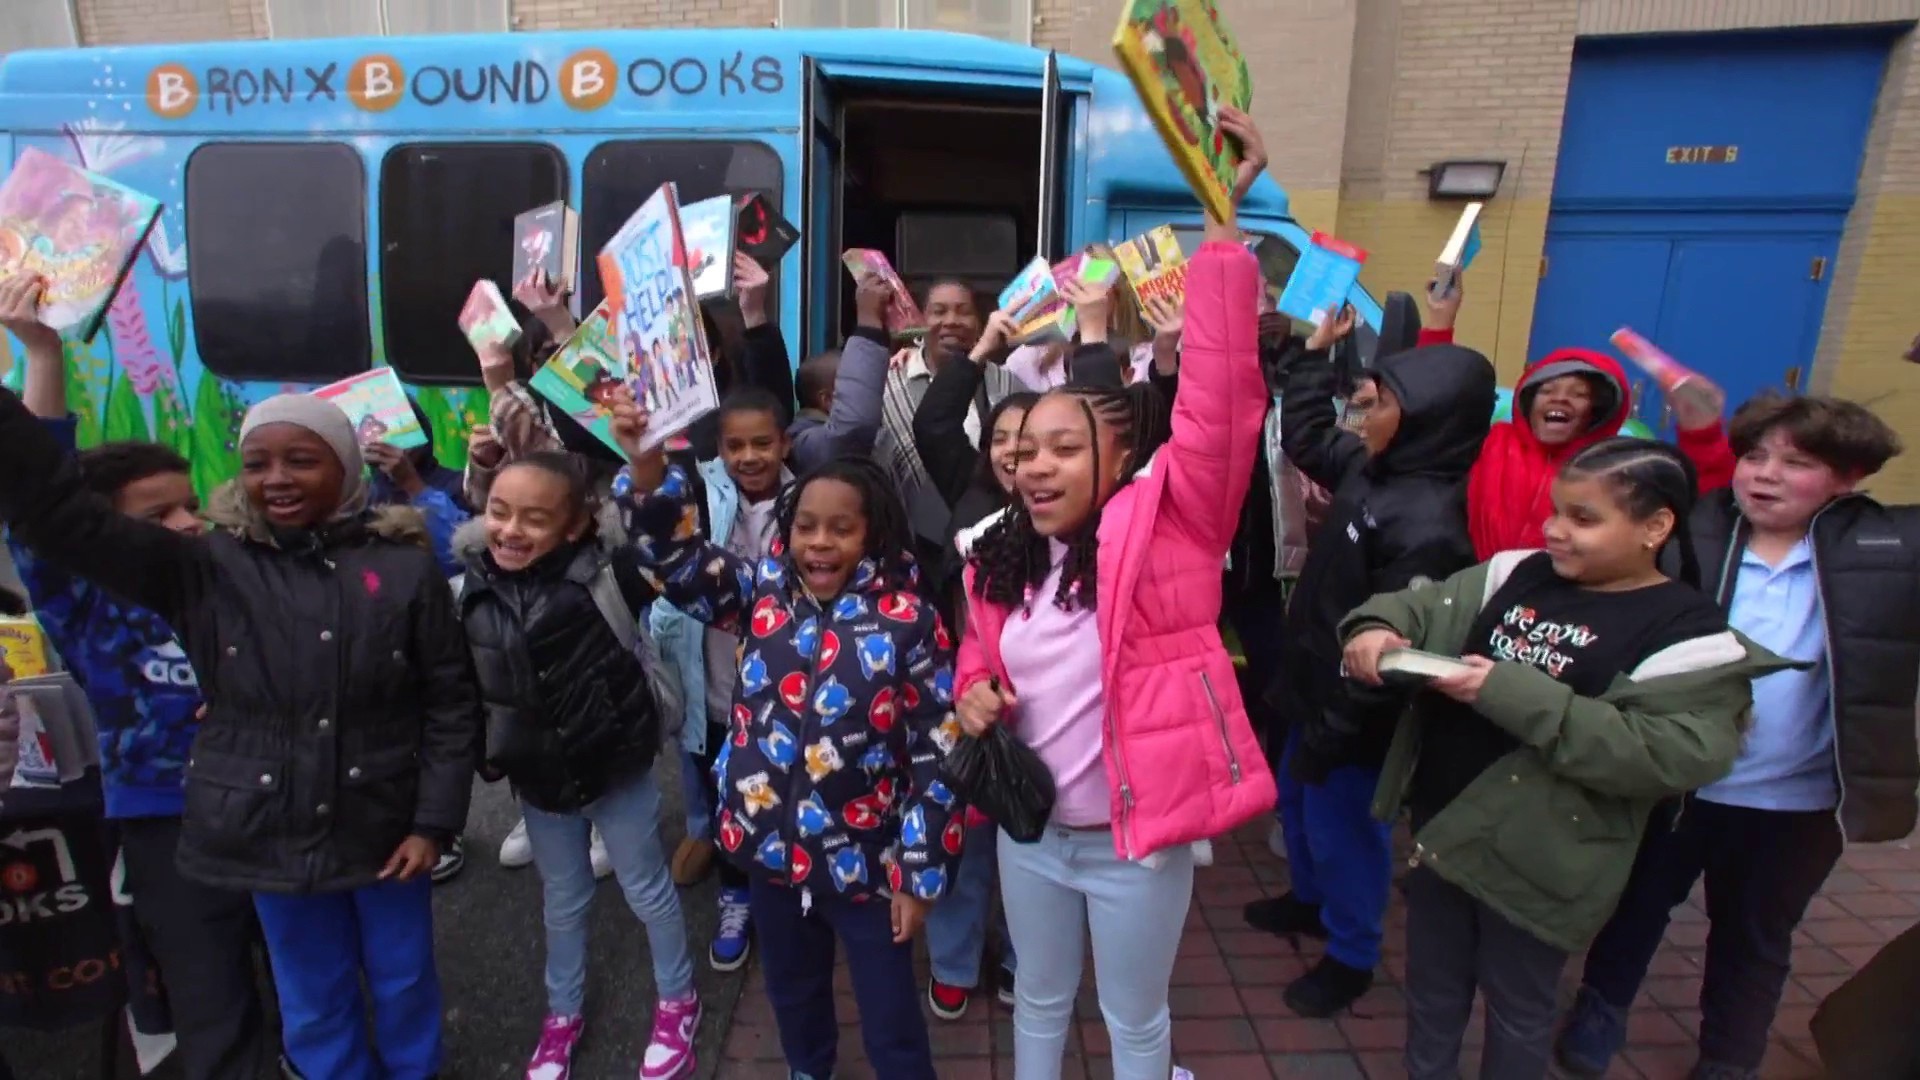 Book bus that provides books to kids in need gets surprise donation